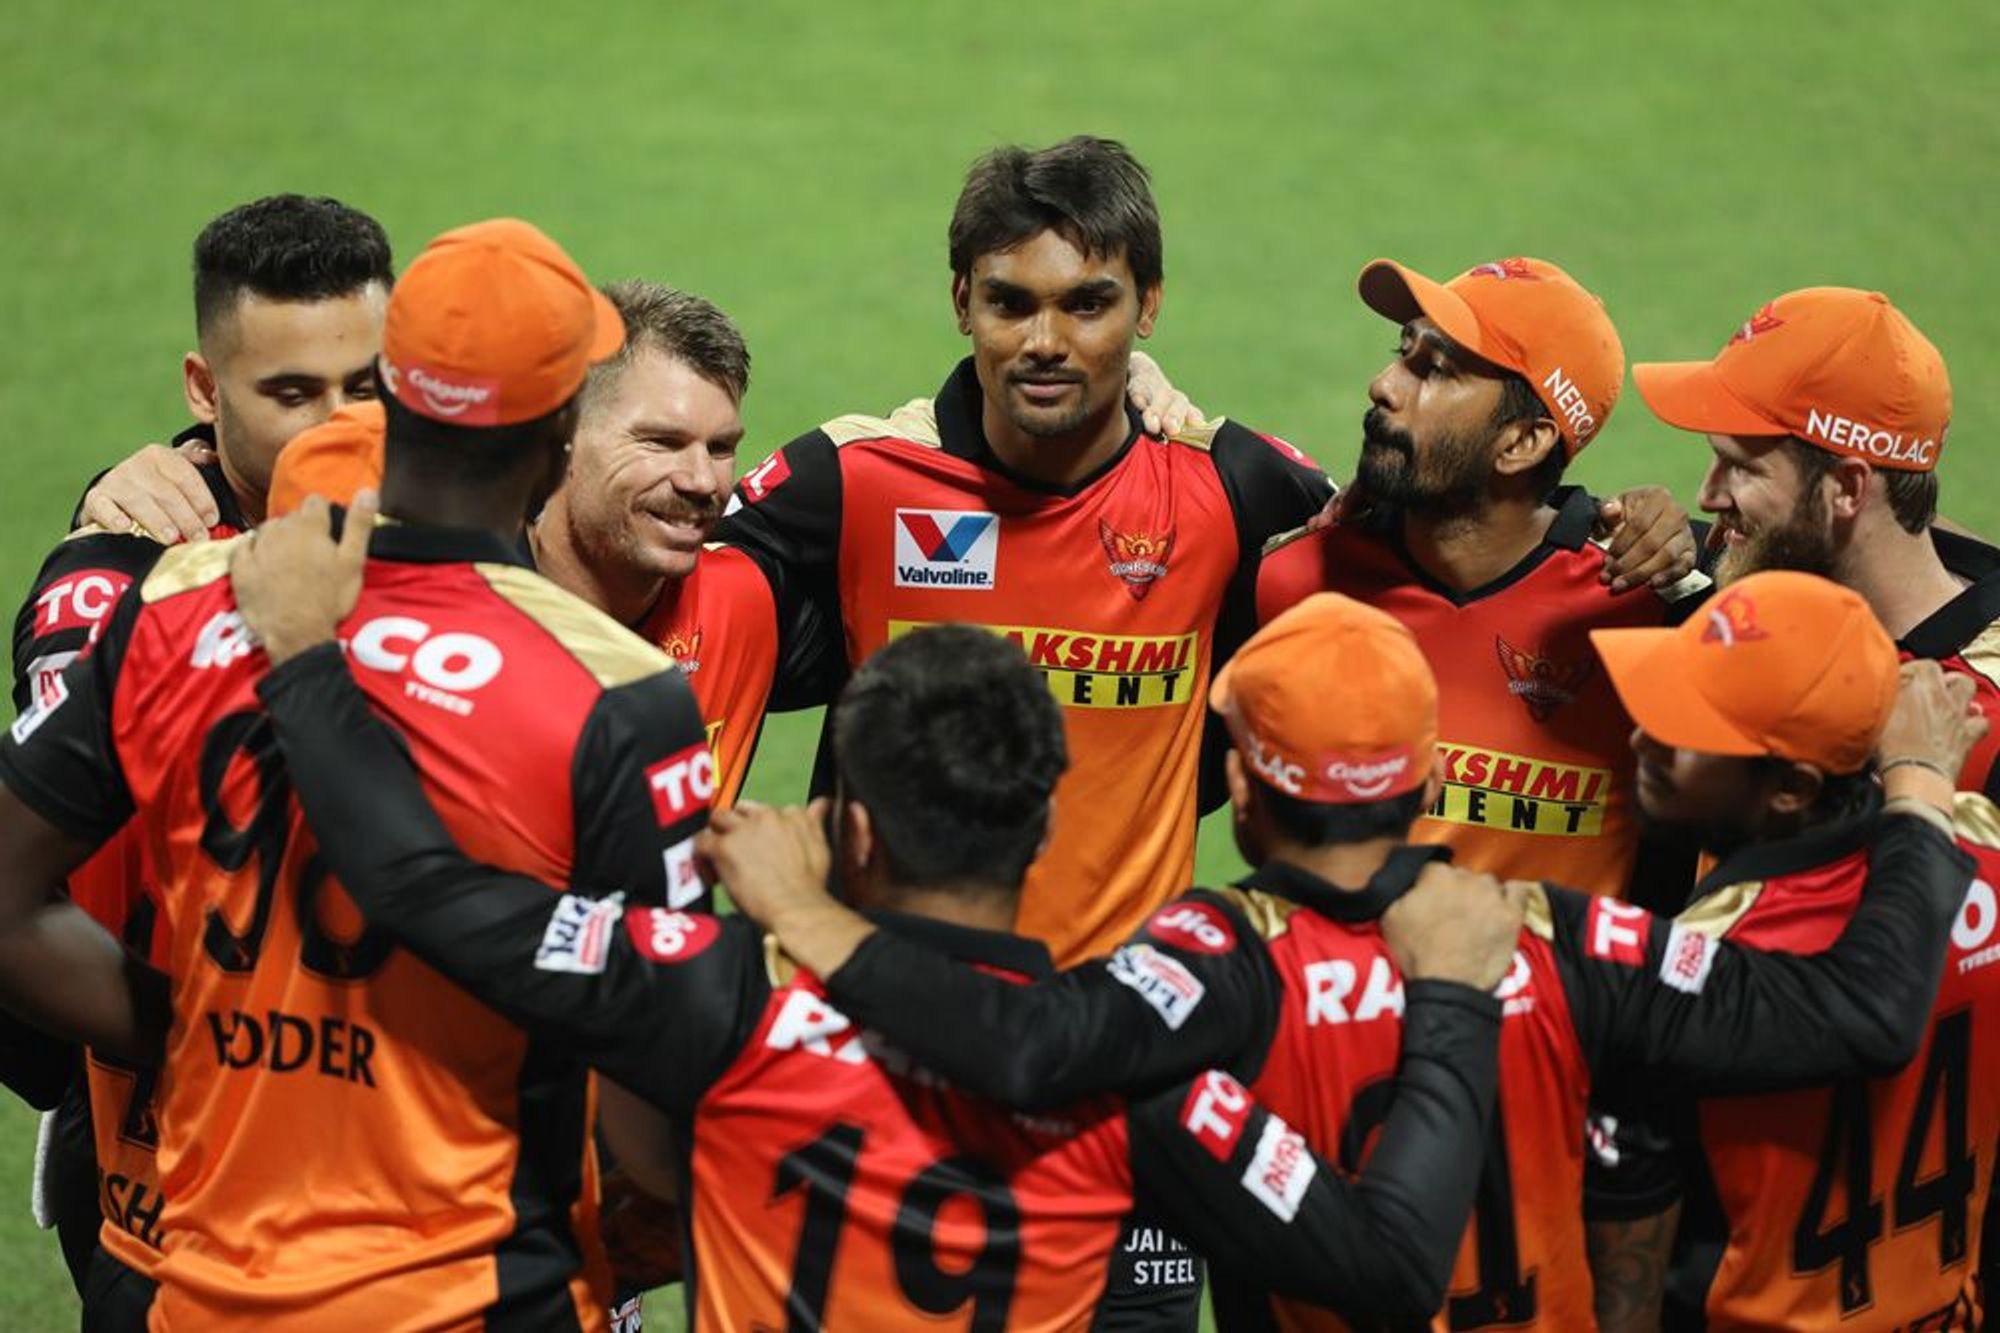 M52+%3a+Hyderabad+put+RCB+in+trouble%2c+SRH+in+top-4+by+winning+5+wickets